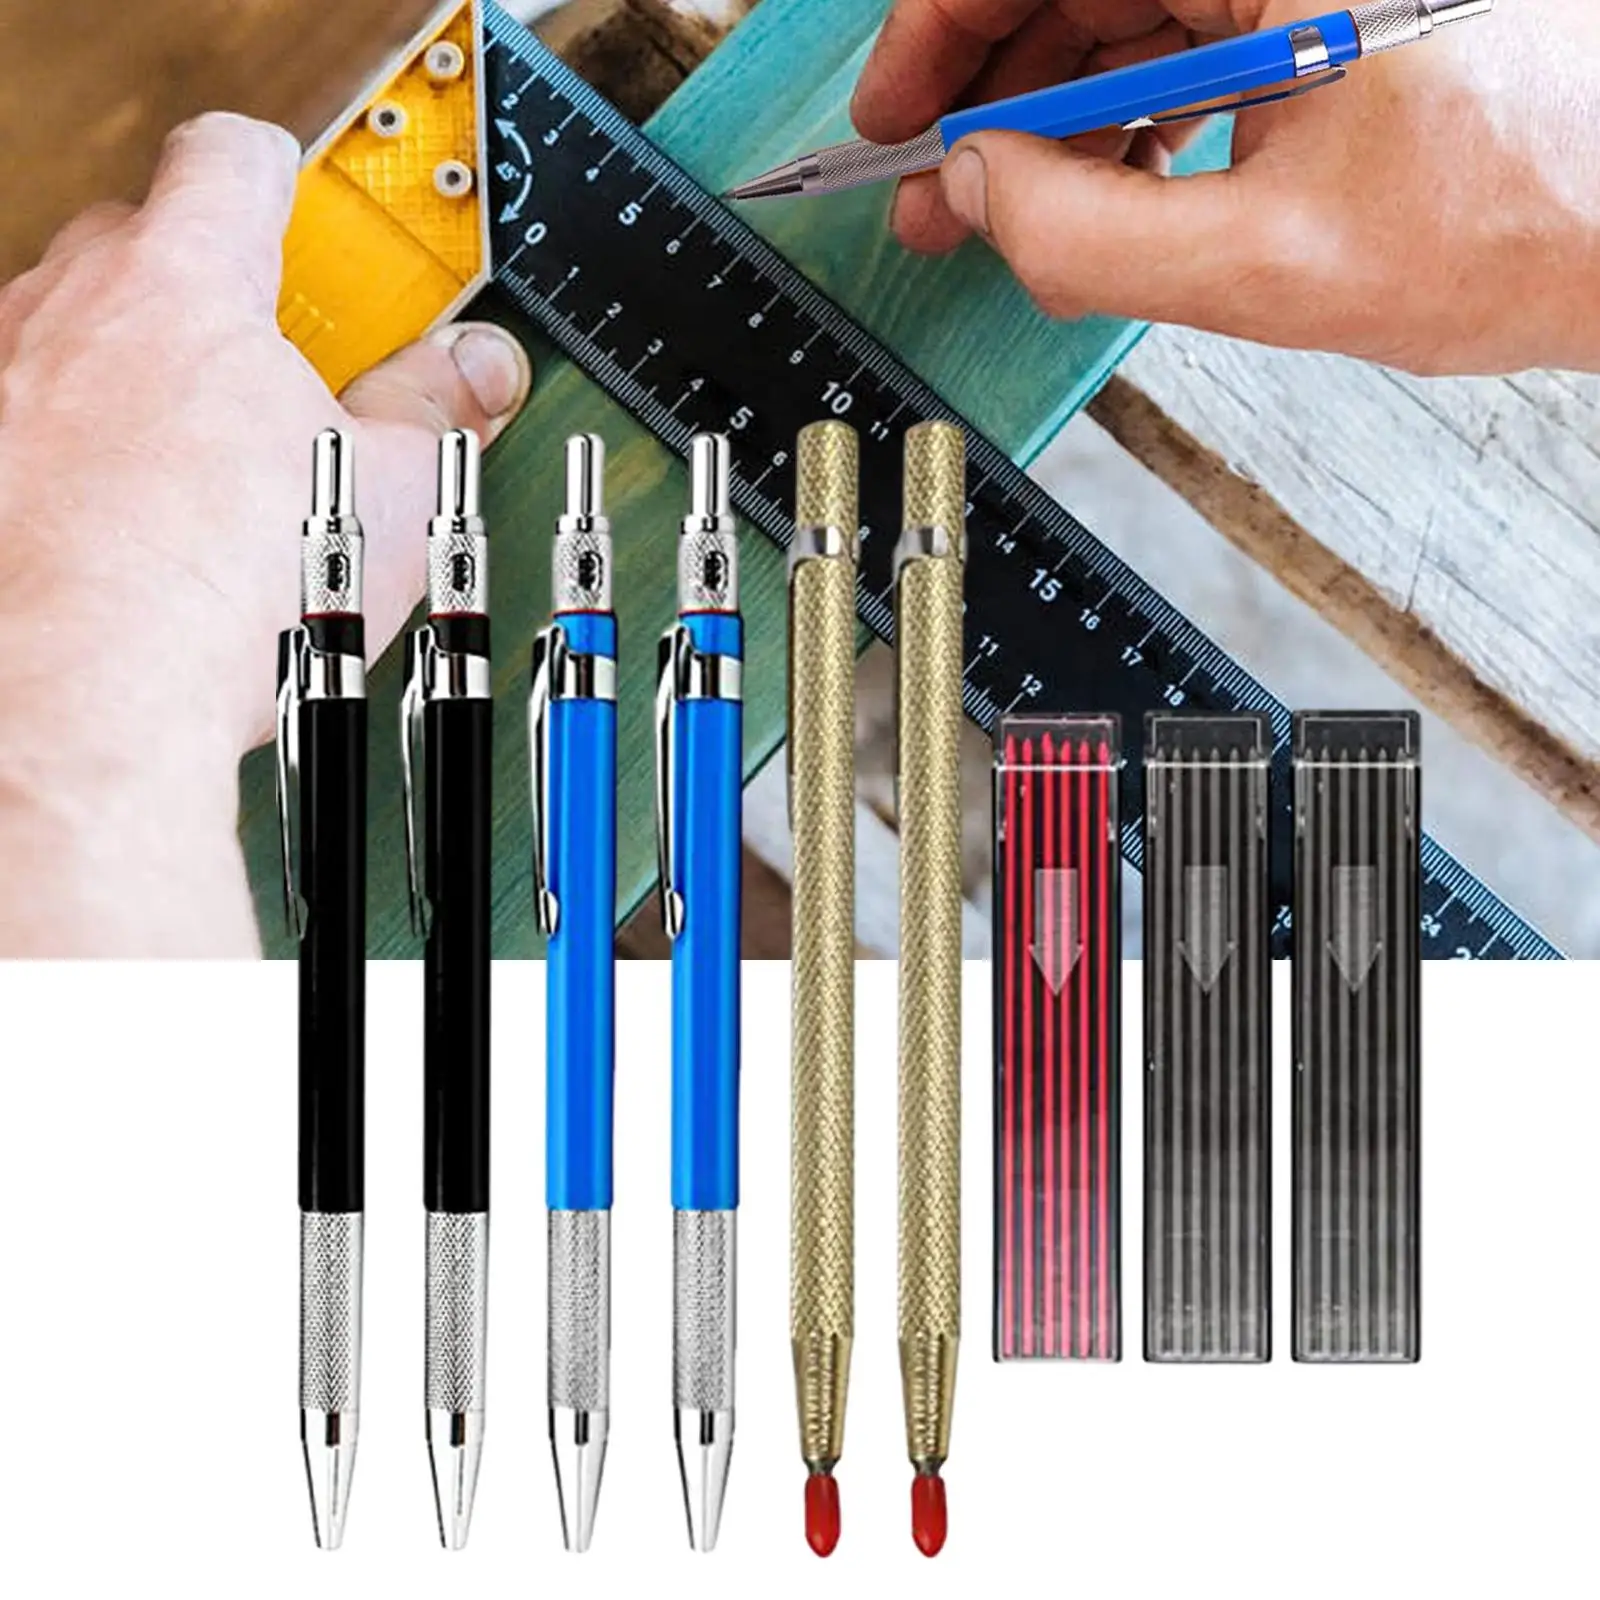 Carpenter Automatic Pencil Set with 36 Refills Leads Marker Set Marking Tool for Architect Scriber Glass Woodworking Ceramics